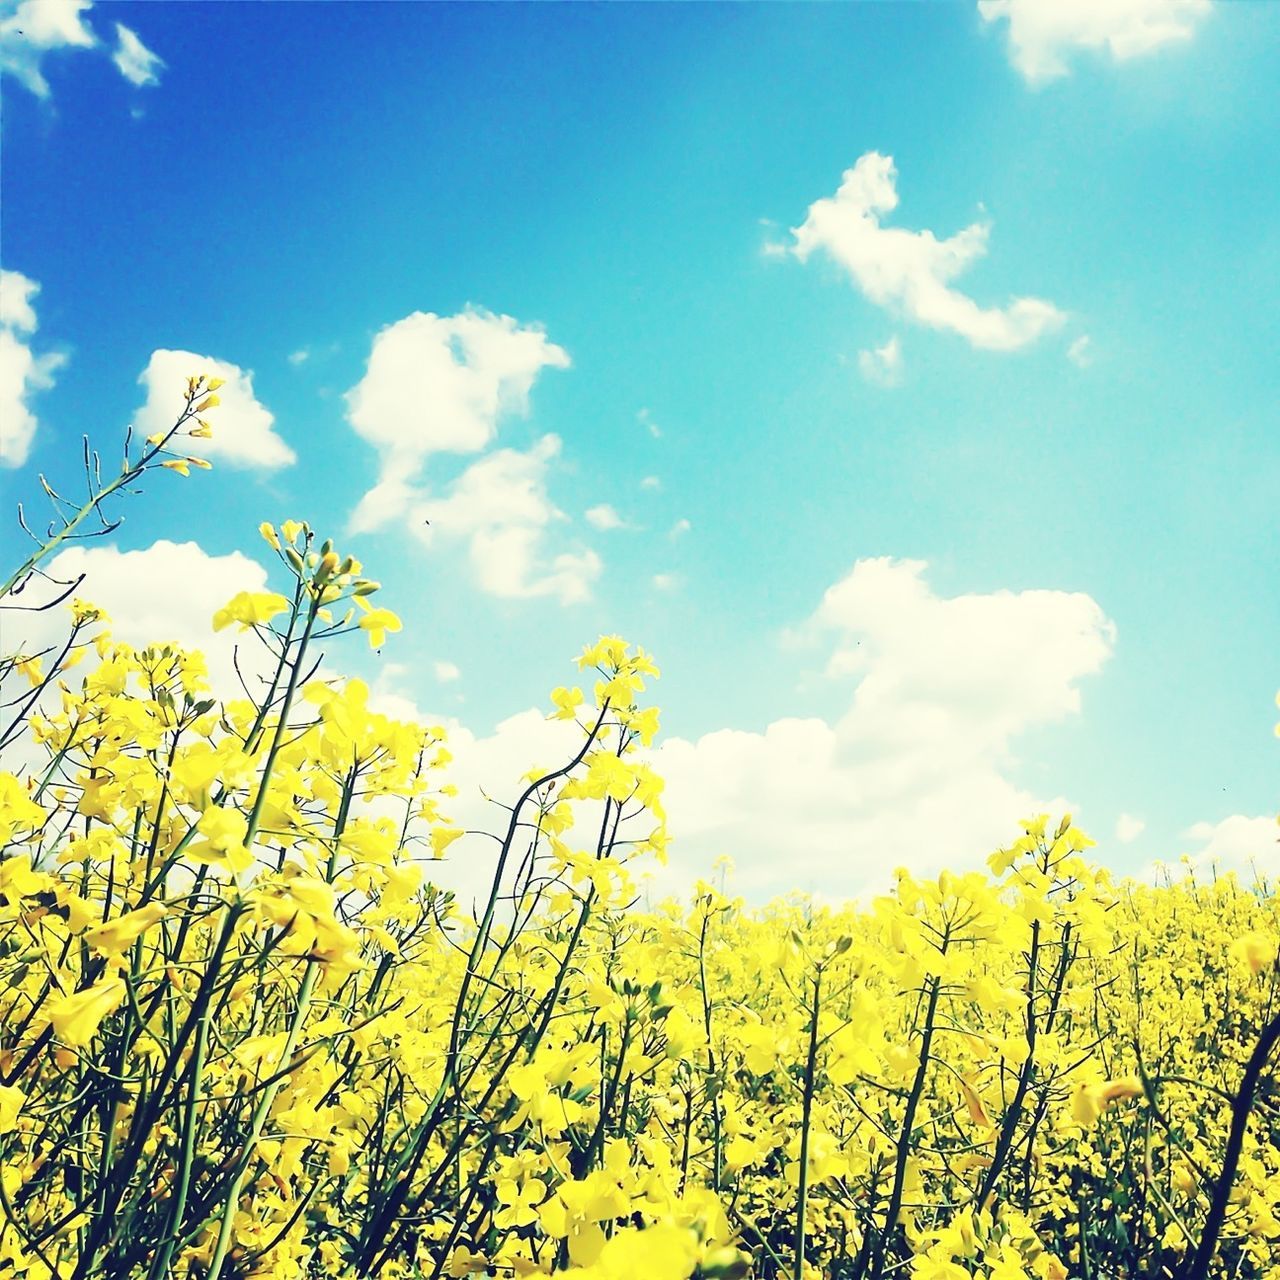 yellow, sky, low angle view, growth, beauty in nature, nature, flower, blue, cloud - sky, tranquility, tree, cloud, branch, scenics, tranquil scene, freshness, field, outdoors, plant, no people